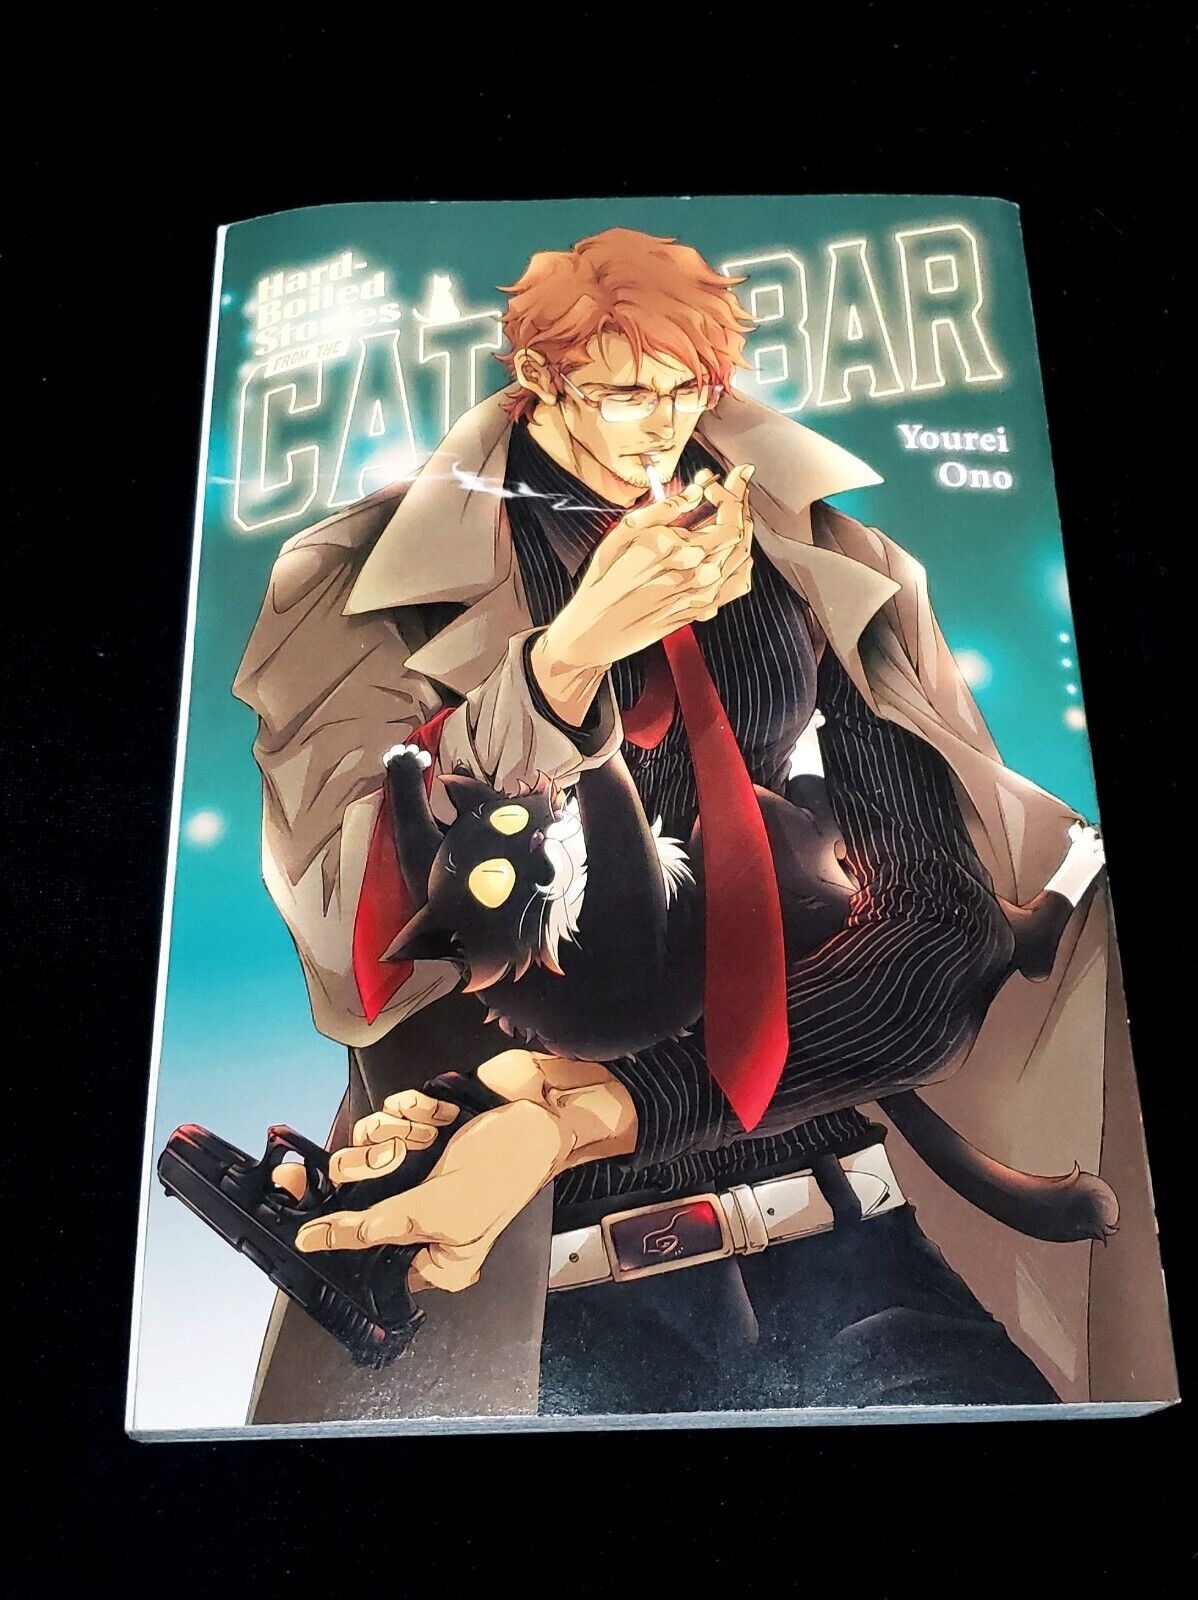 Hard-Boiled Stories from the Cat Bar PAPERBACK – May 25, 2021 by Yourei Ono